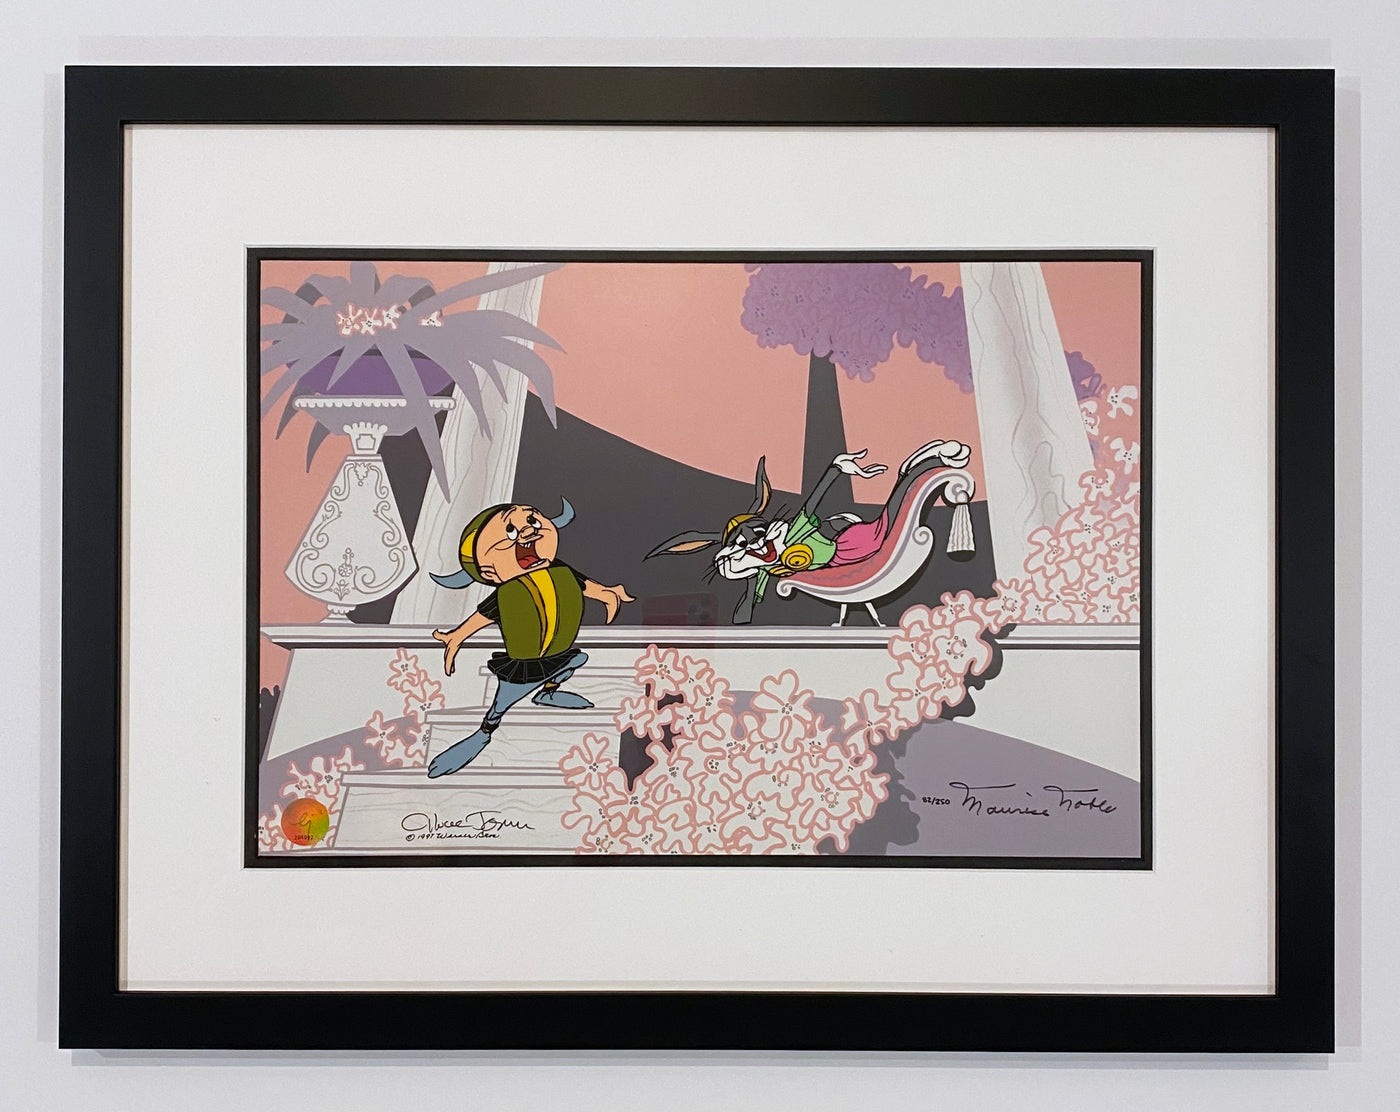 Original Warner Brothers Limited Edition Cel "Be My Wuv!" Signed by Chuck Jones and Maurice Noble